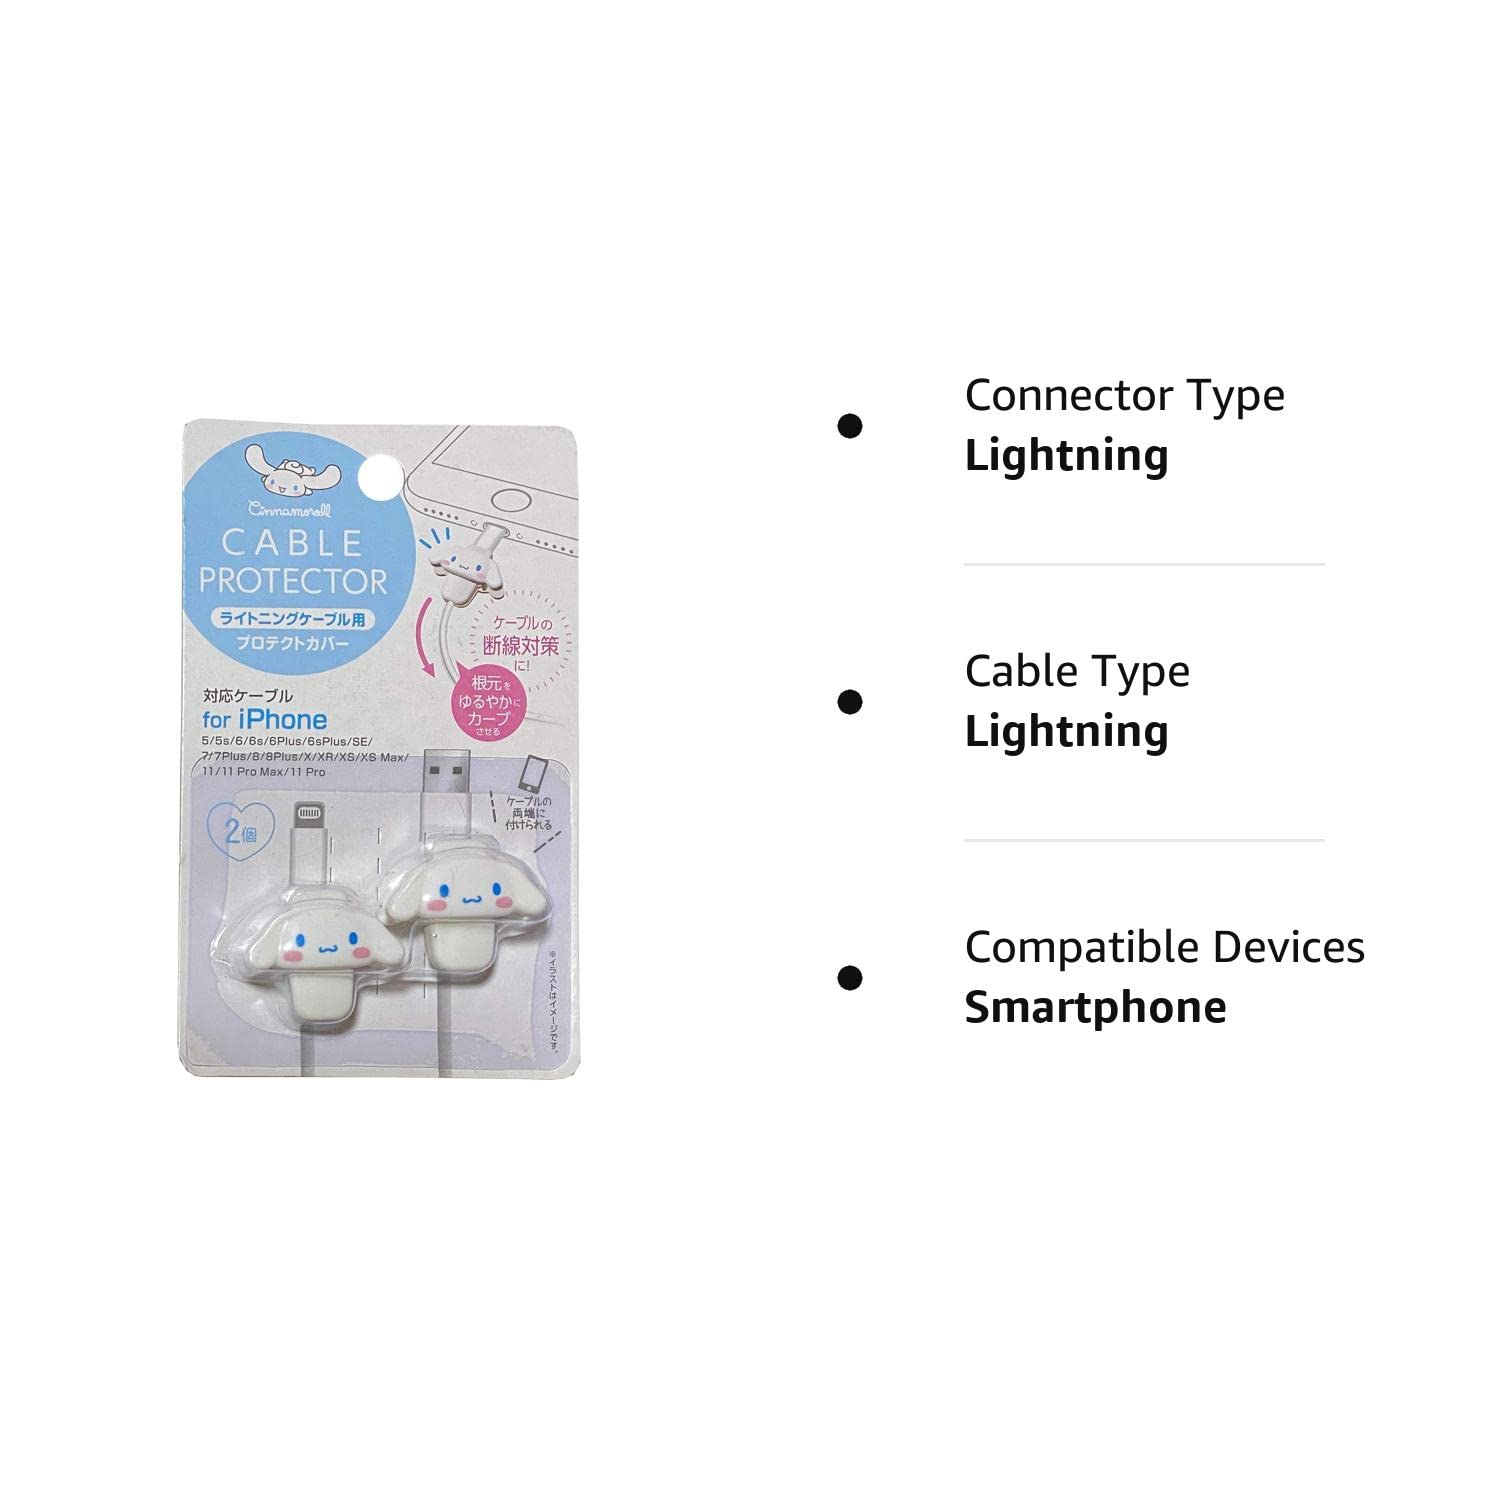 Friend Sanrio Cinnamoroll Cable Protector Cell Phones Accessories 2pcs Set for iPhone (Lightning Cable)